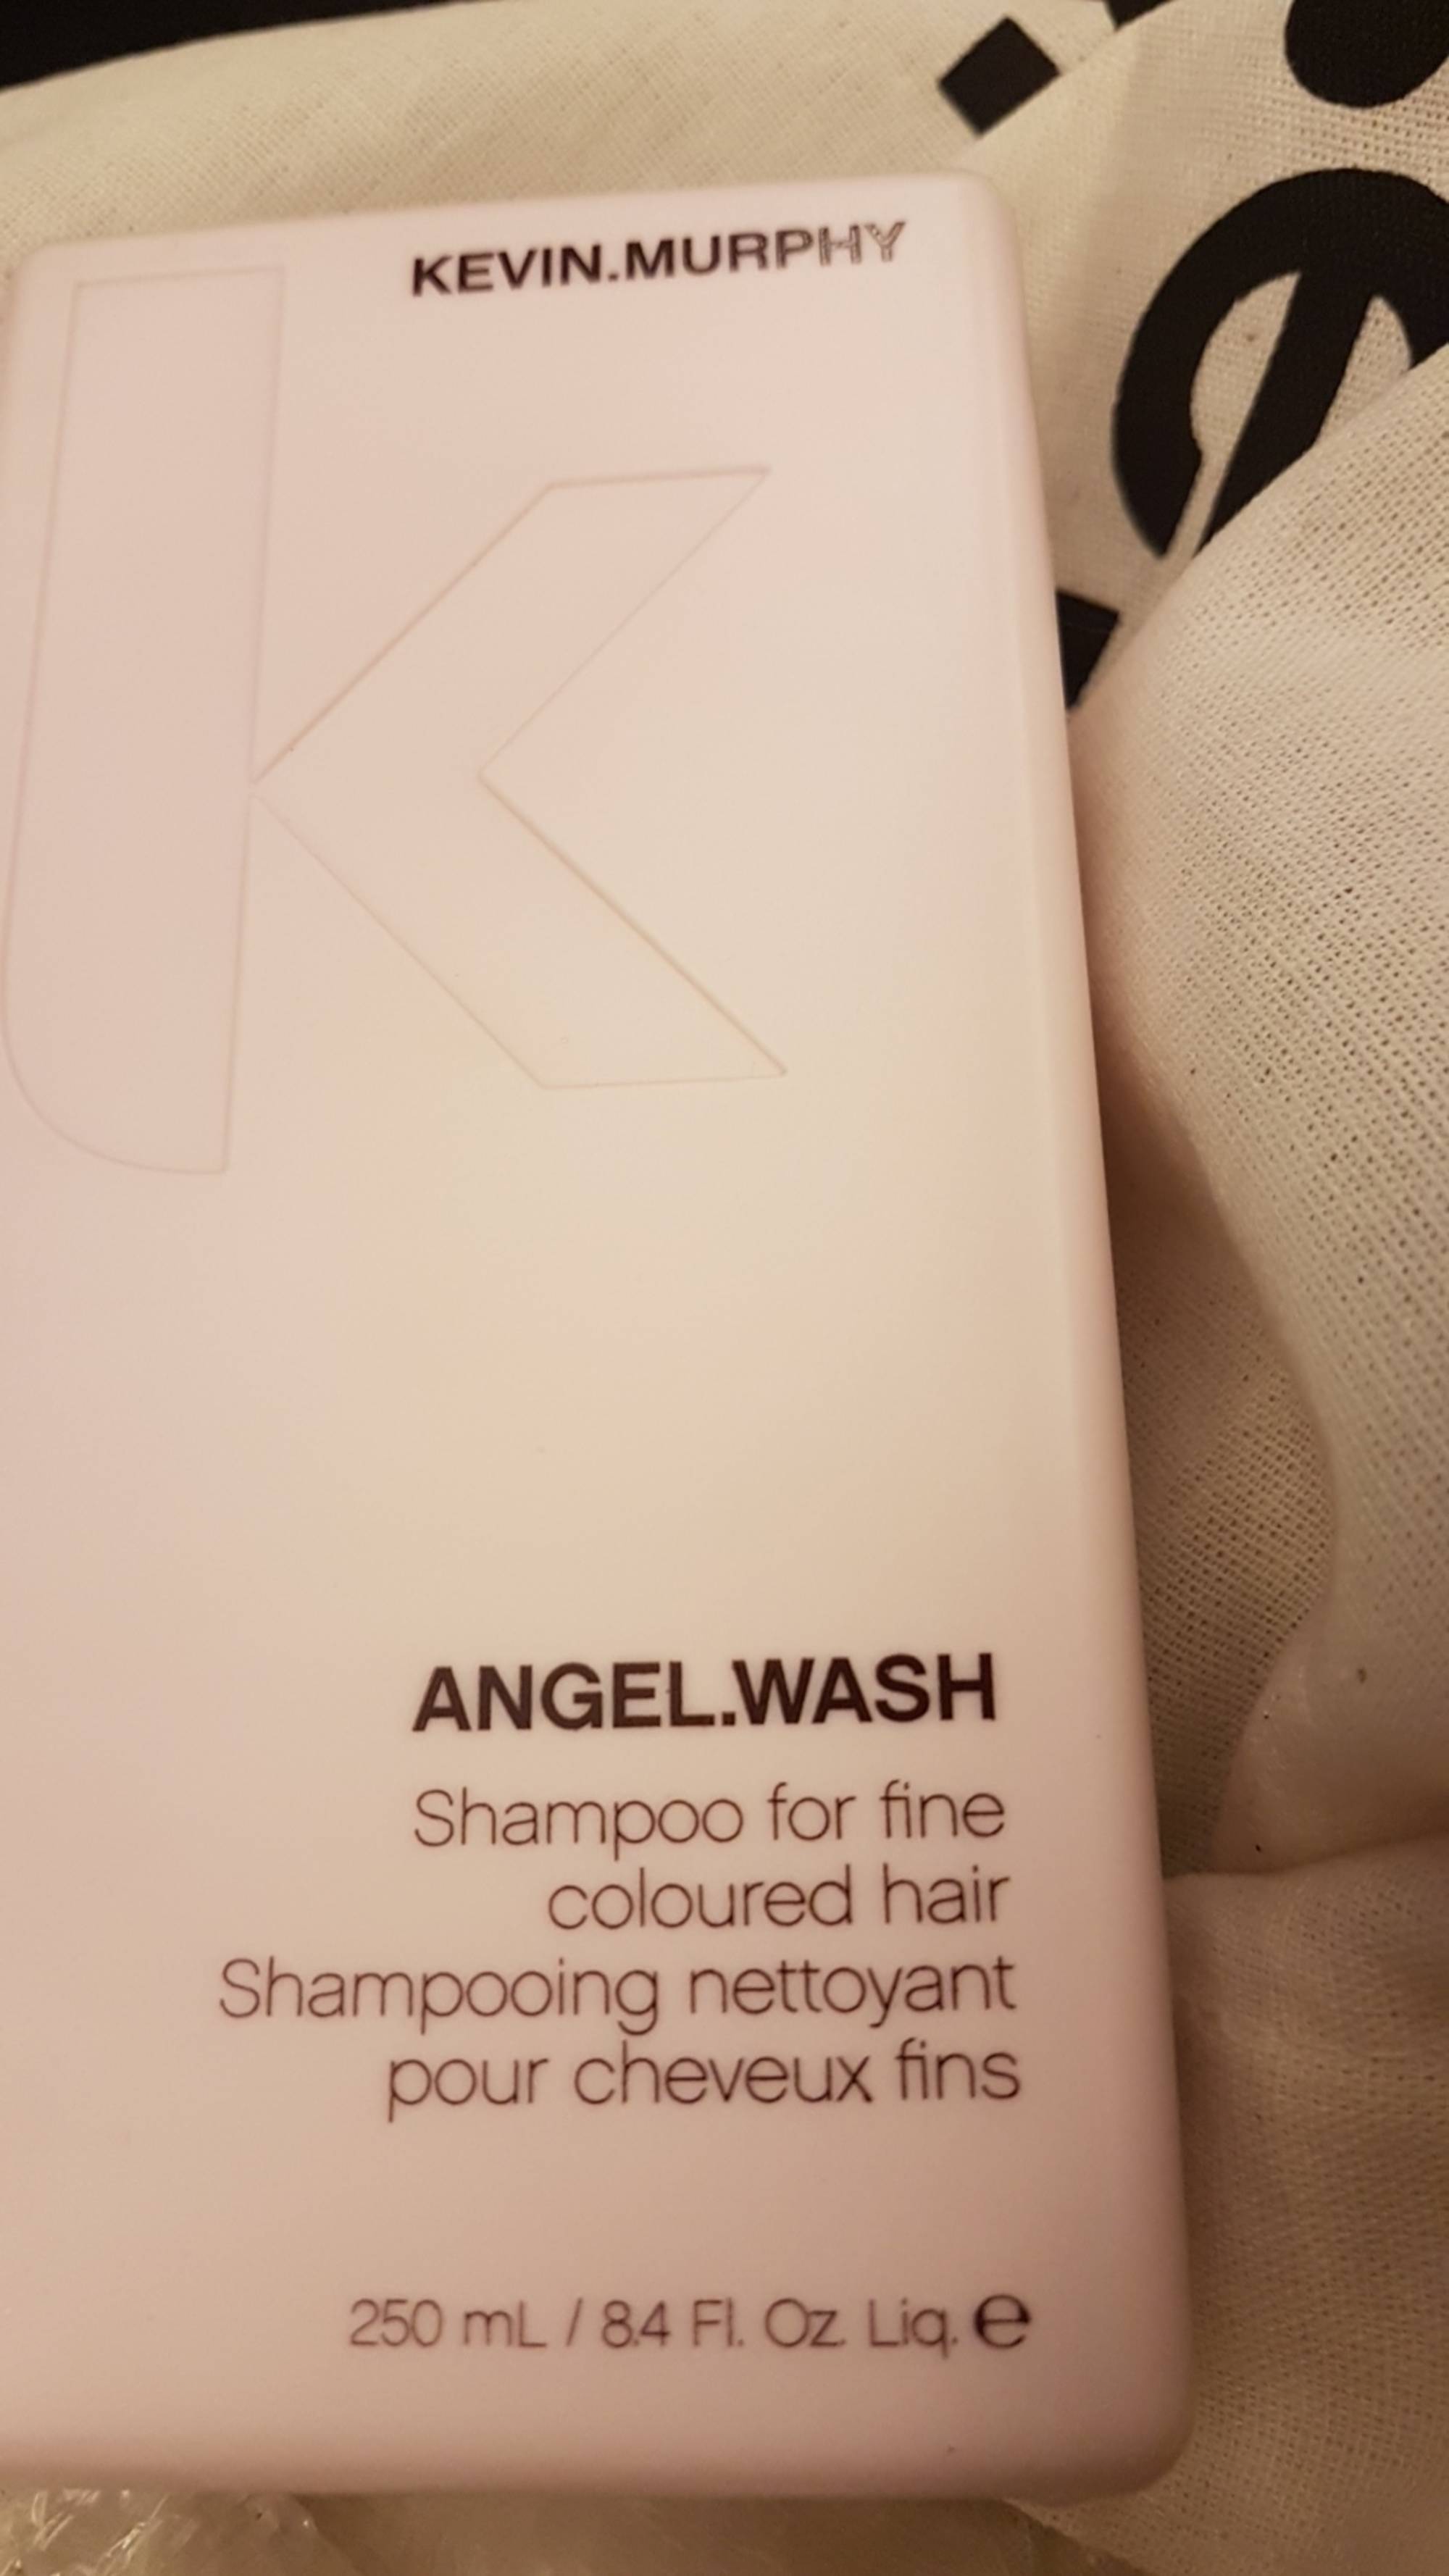 KEVIN MURPHY - Angel wash - Shampooing nettoyant cheveux fins